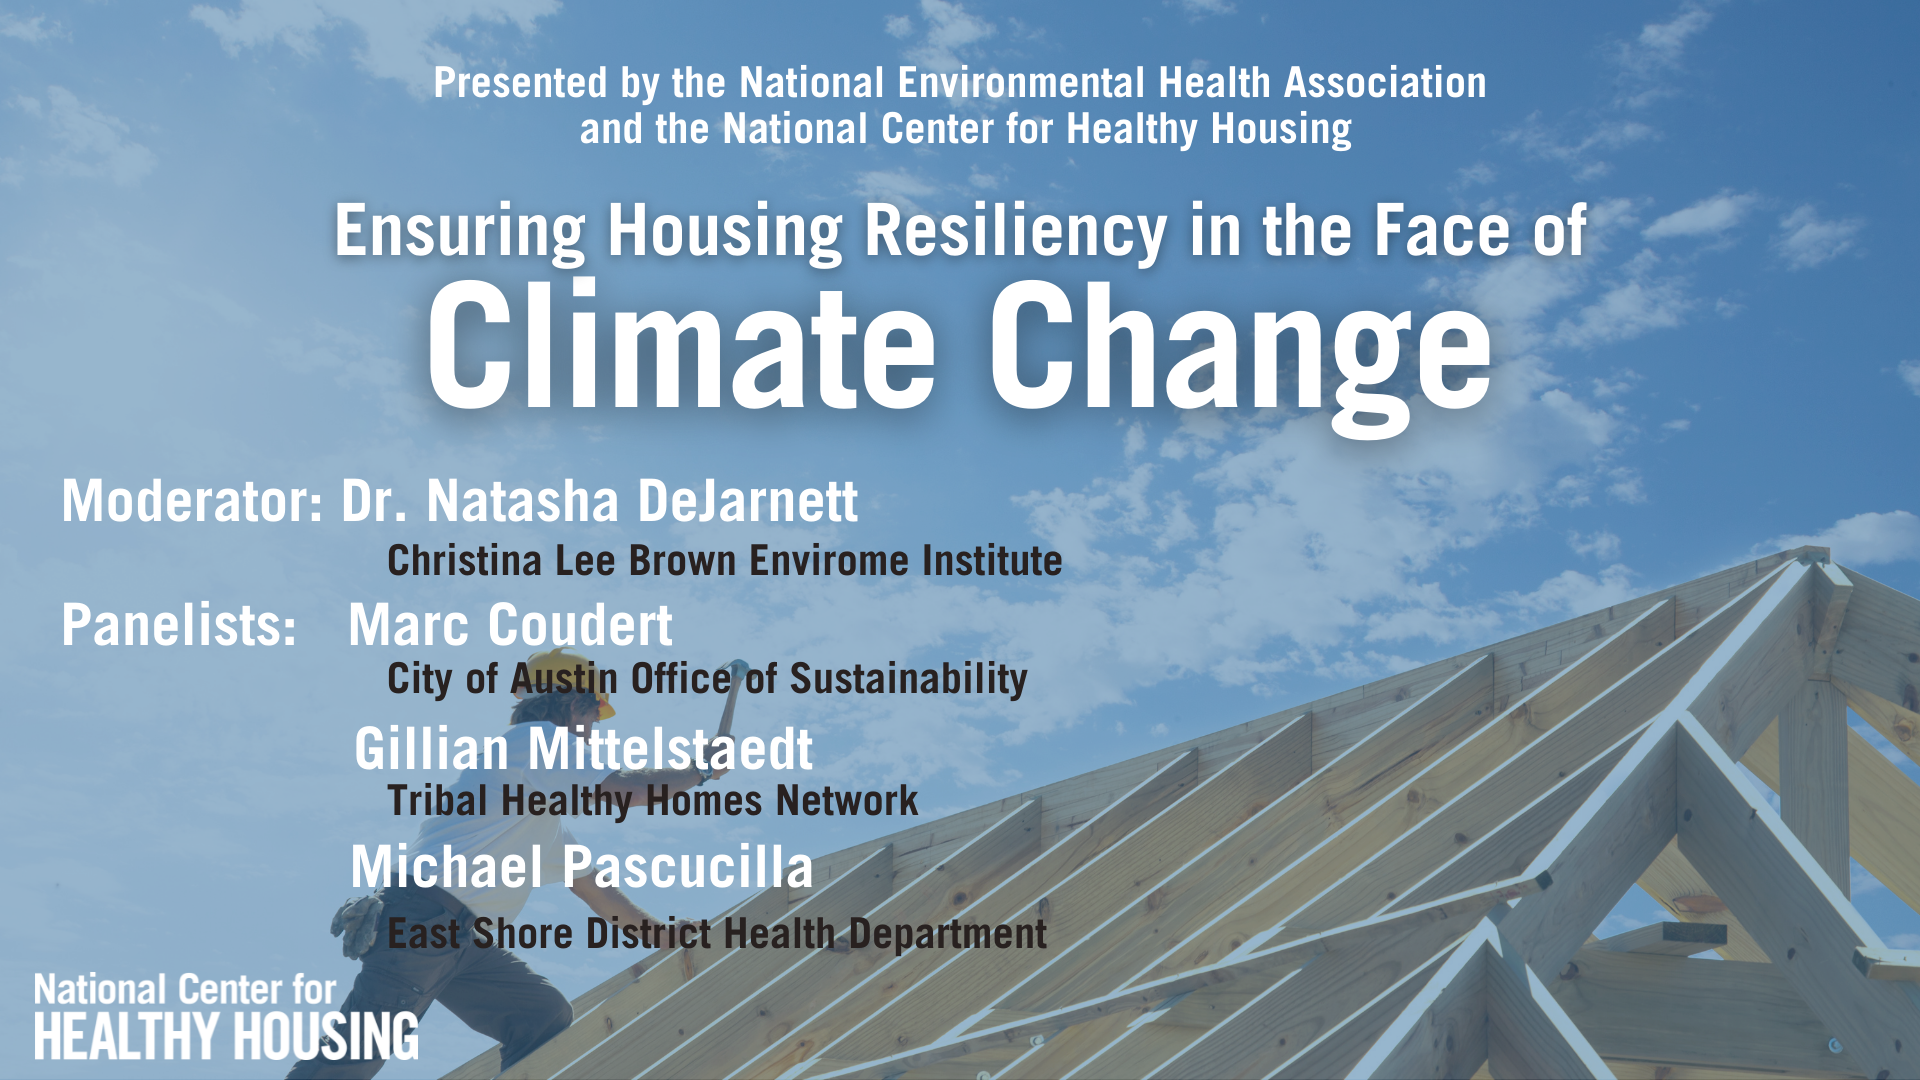 Ensuring Housing Resiliency in the Face of Climate Change [slides]